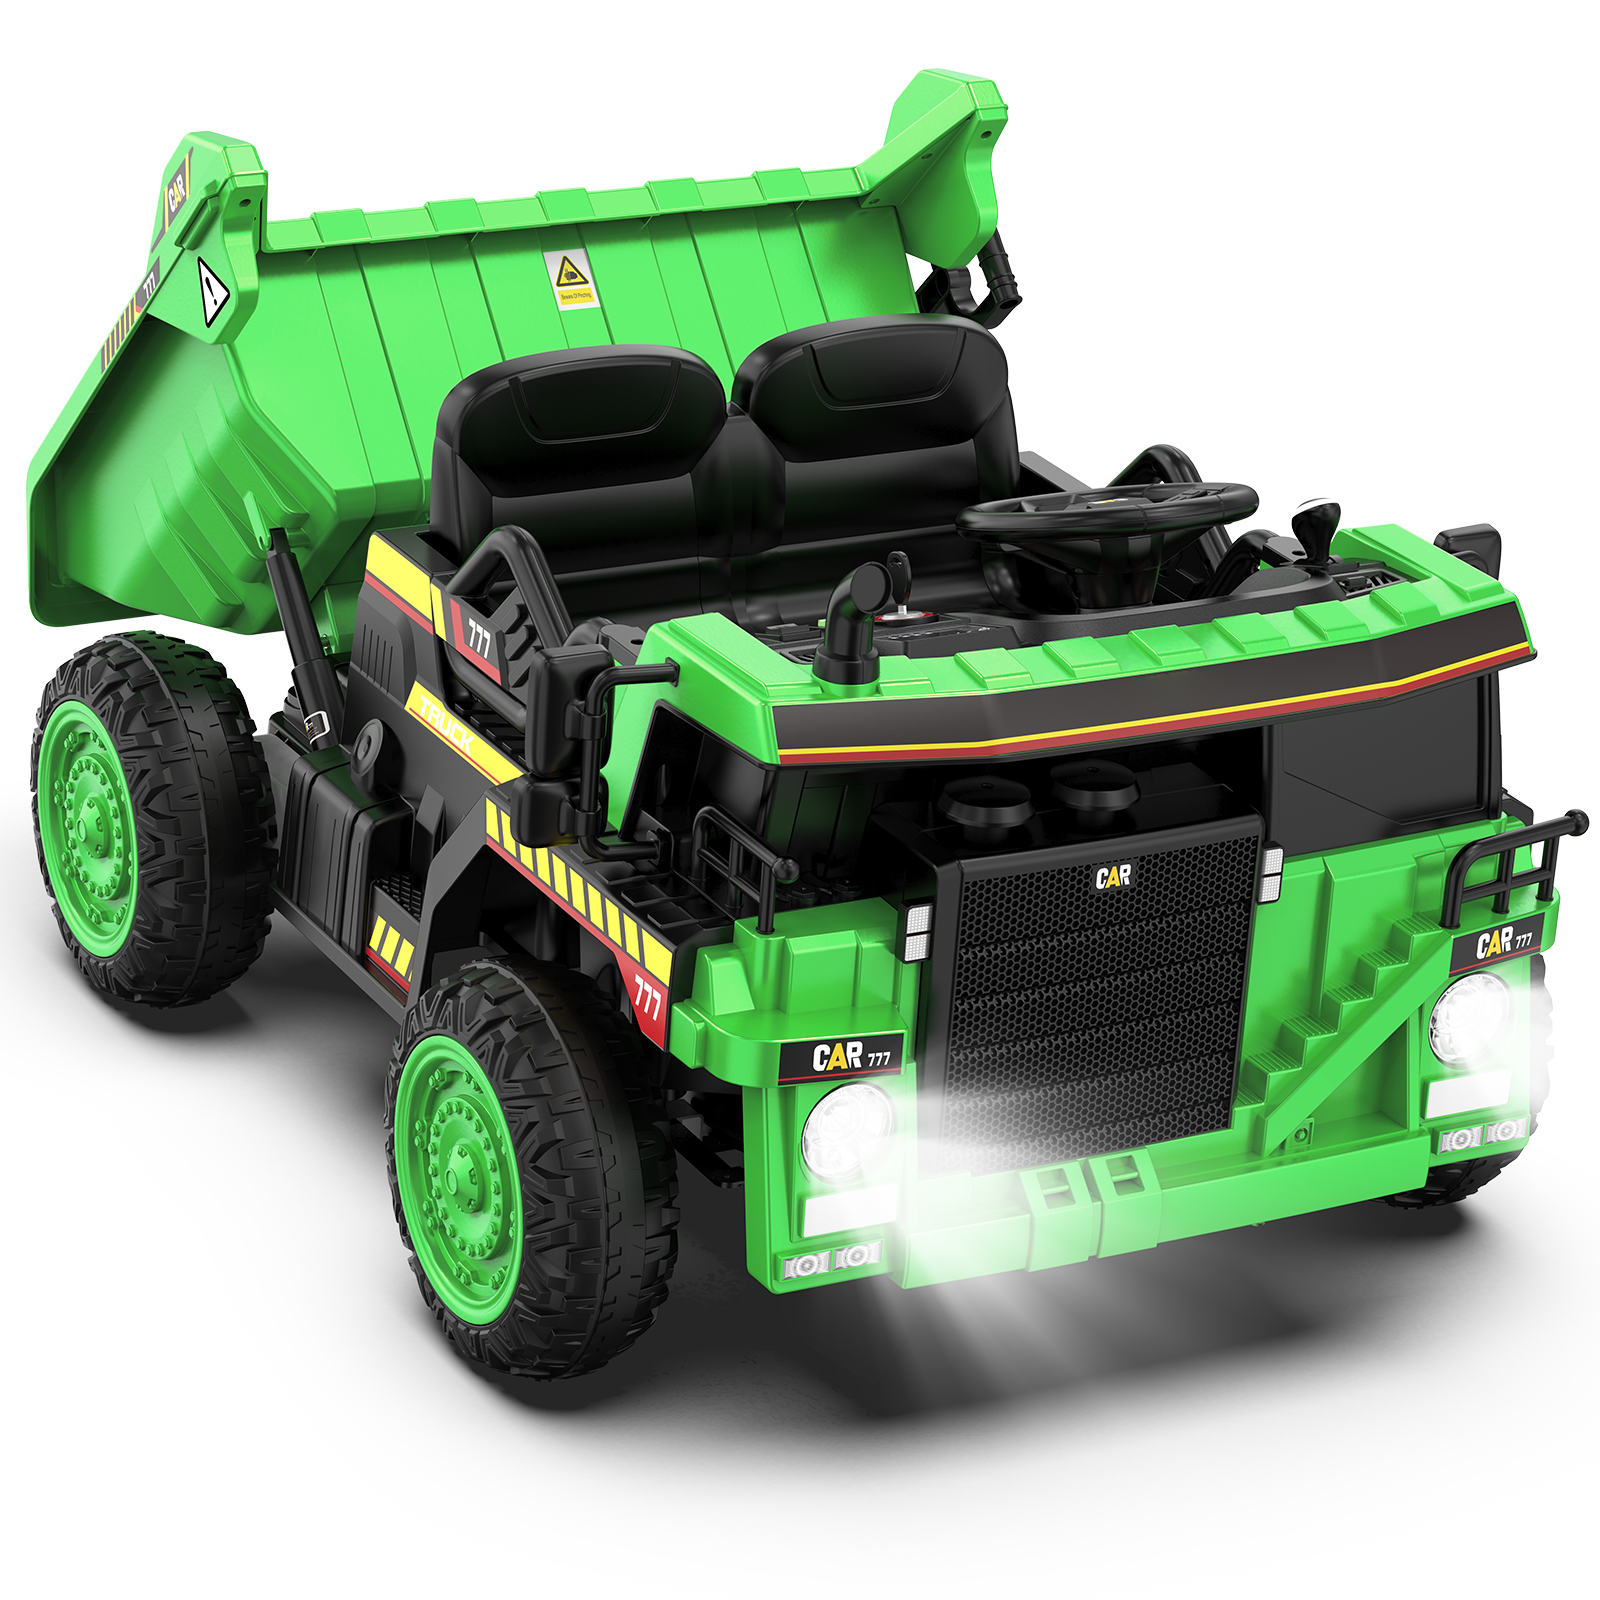 TOKTOO 12Volt Battery Powered Ride on Tractor w/ Remote Control, Music Player, Electric Dump Bed-Green - image 1 of 13